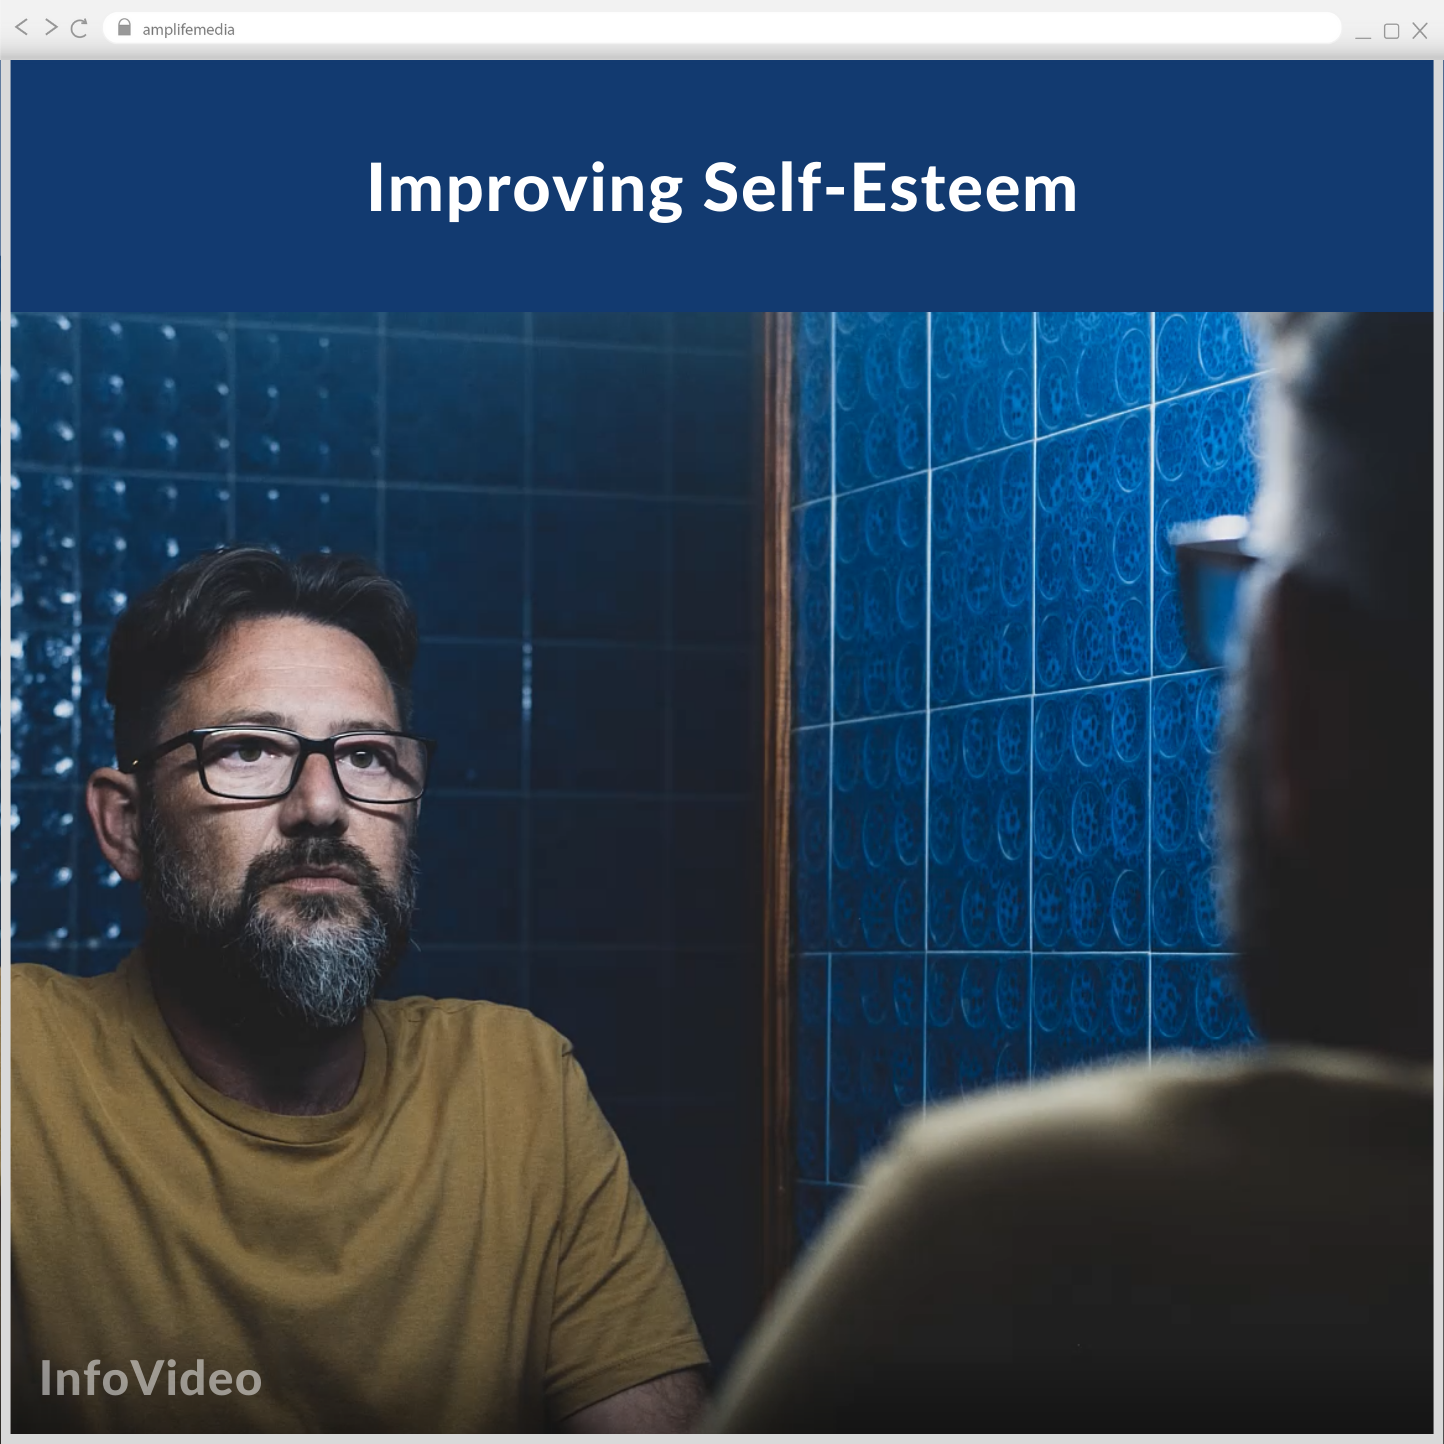 Subscription to Wellbeing Media: Improving Self Esteem IV 322